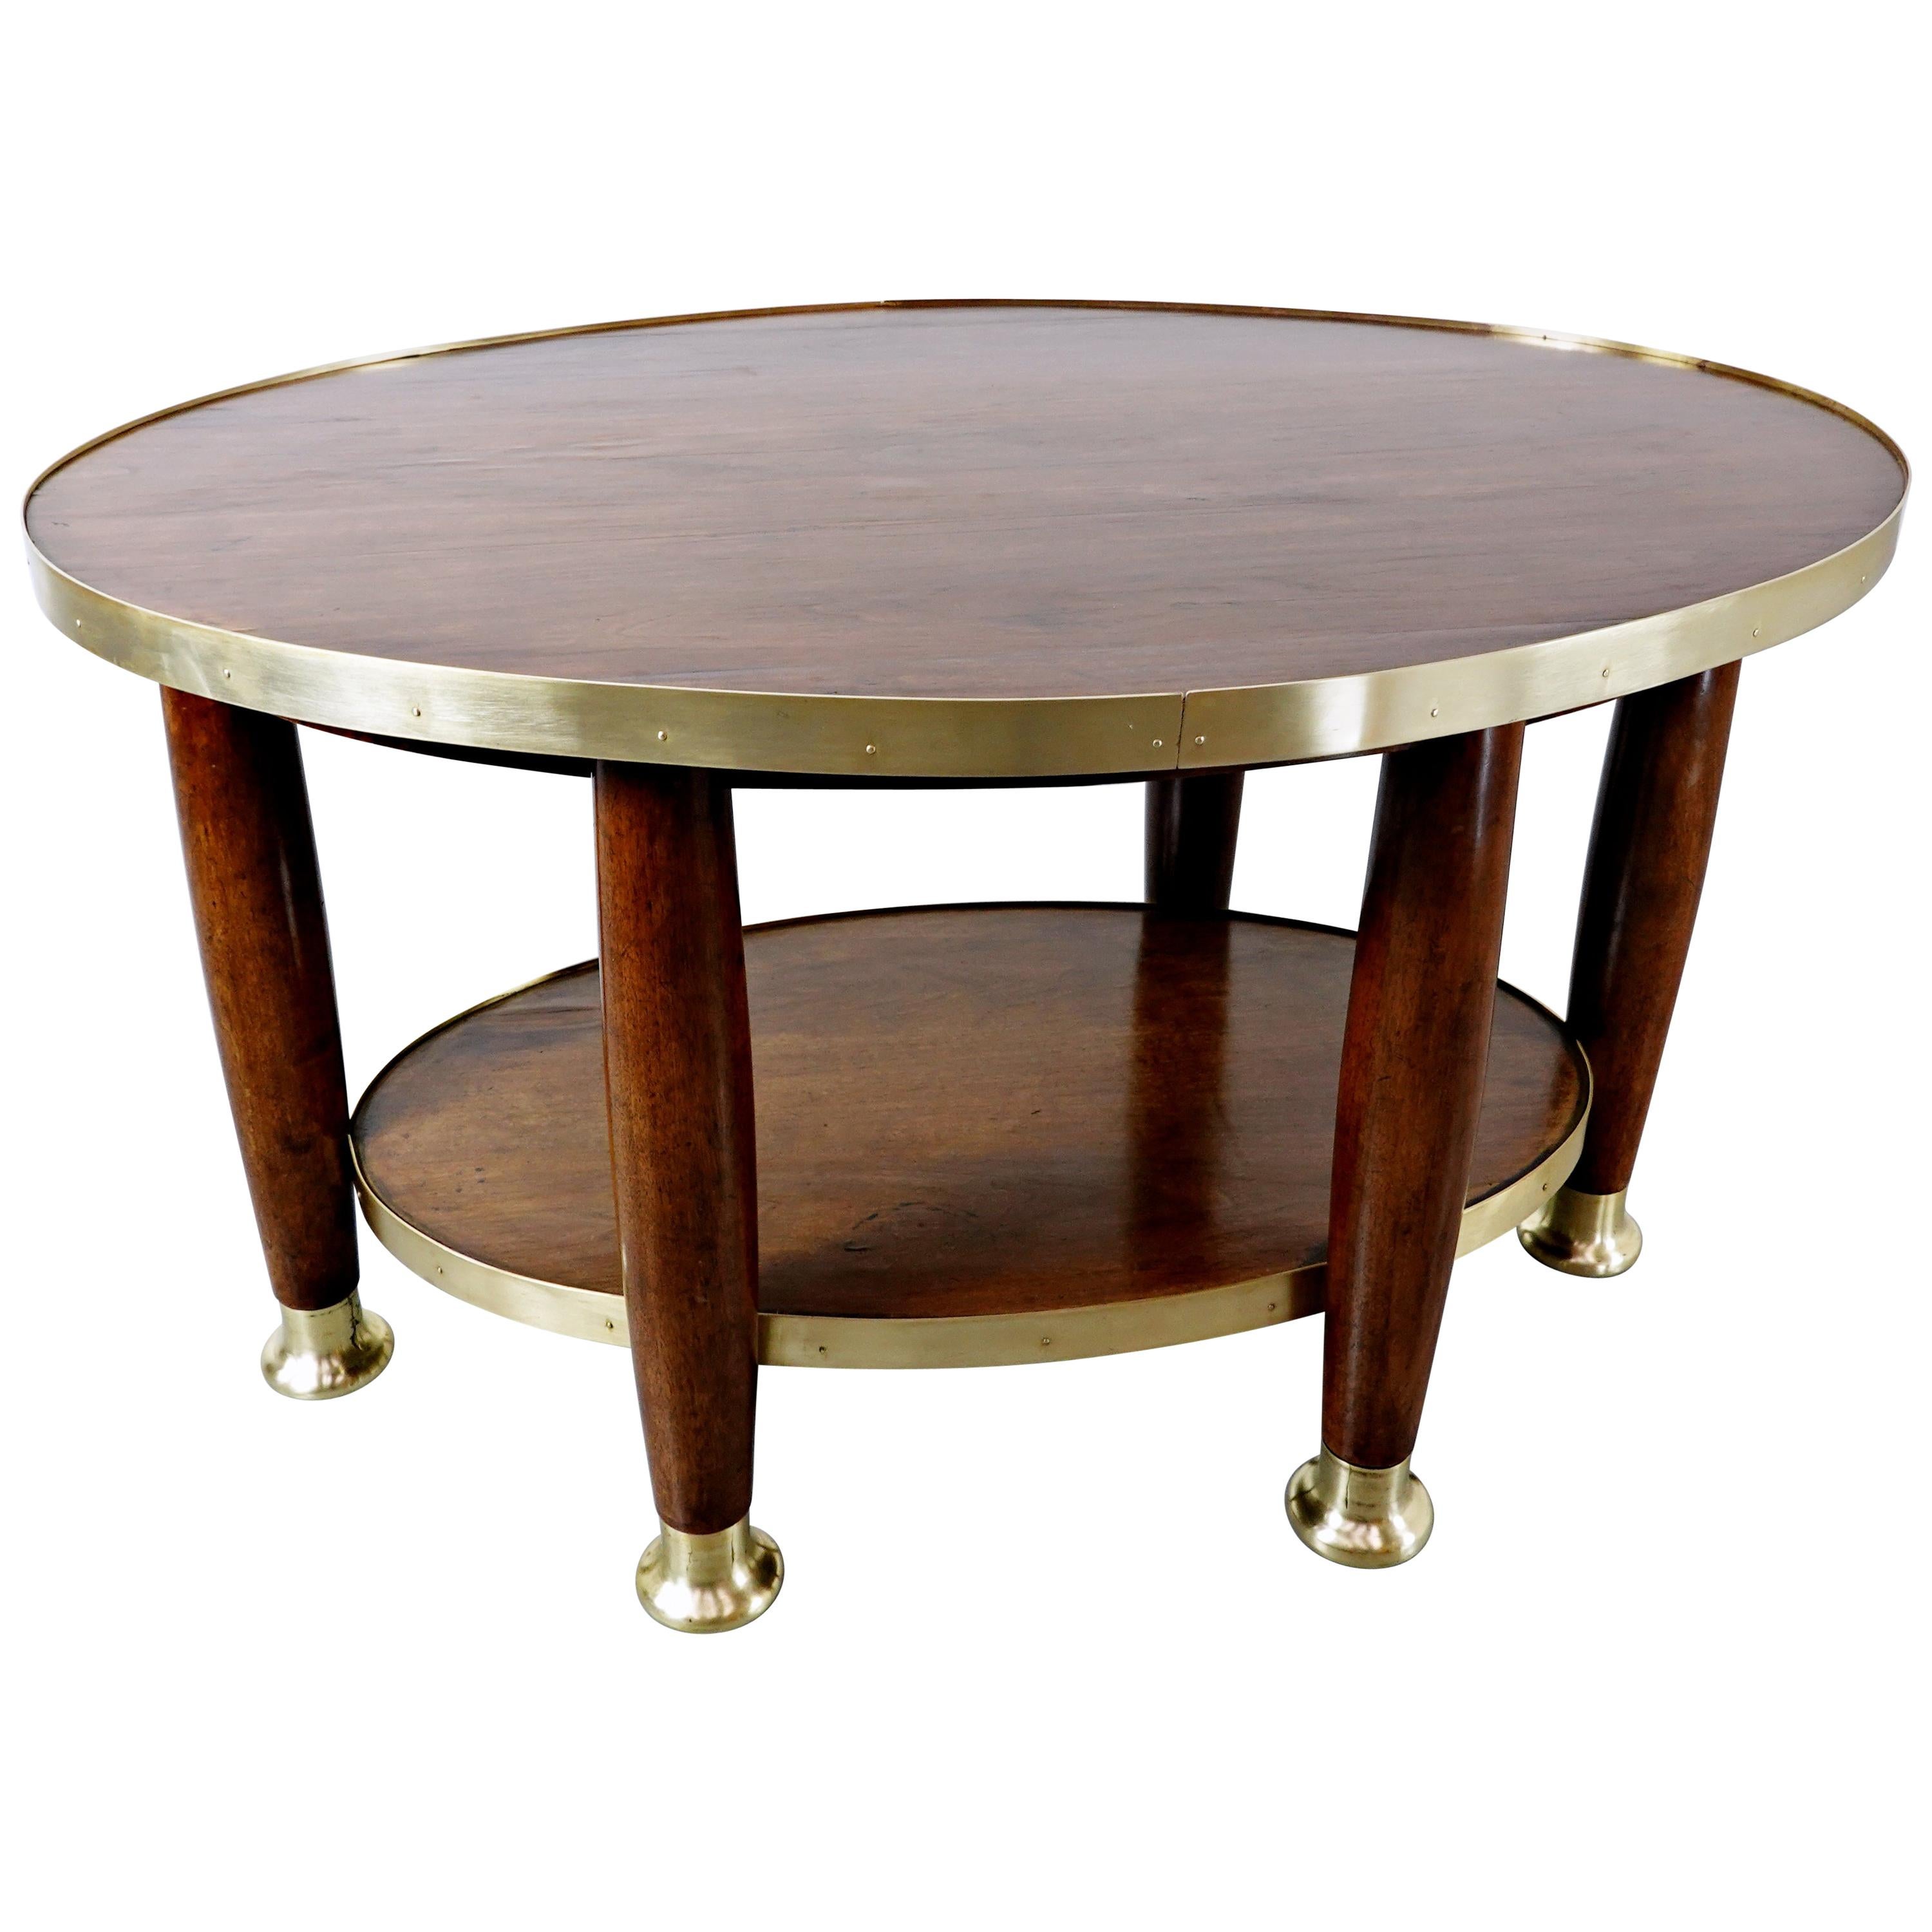 Art Nouveau Table in the Style of Adolf Loos, Wood and Brass, circa 1910